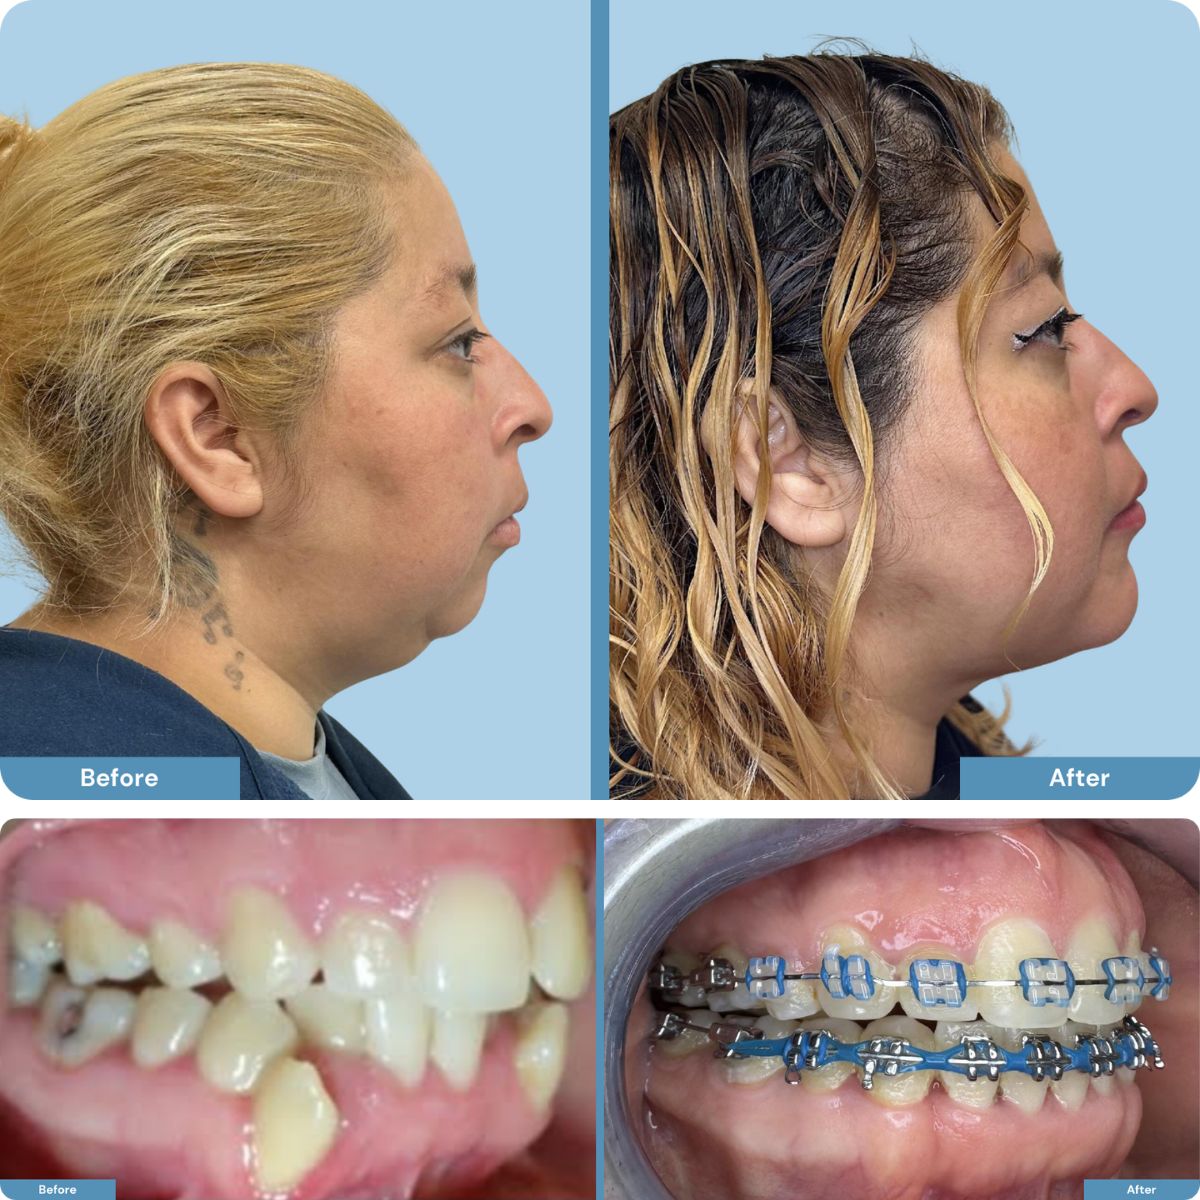 Before and after orthognathic jaw surgery on person